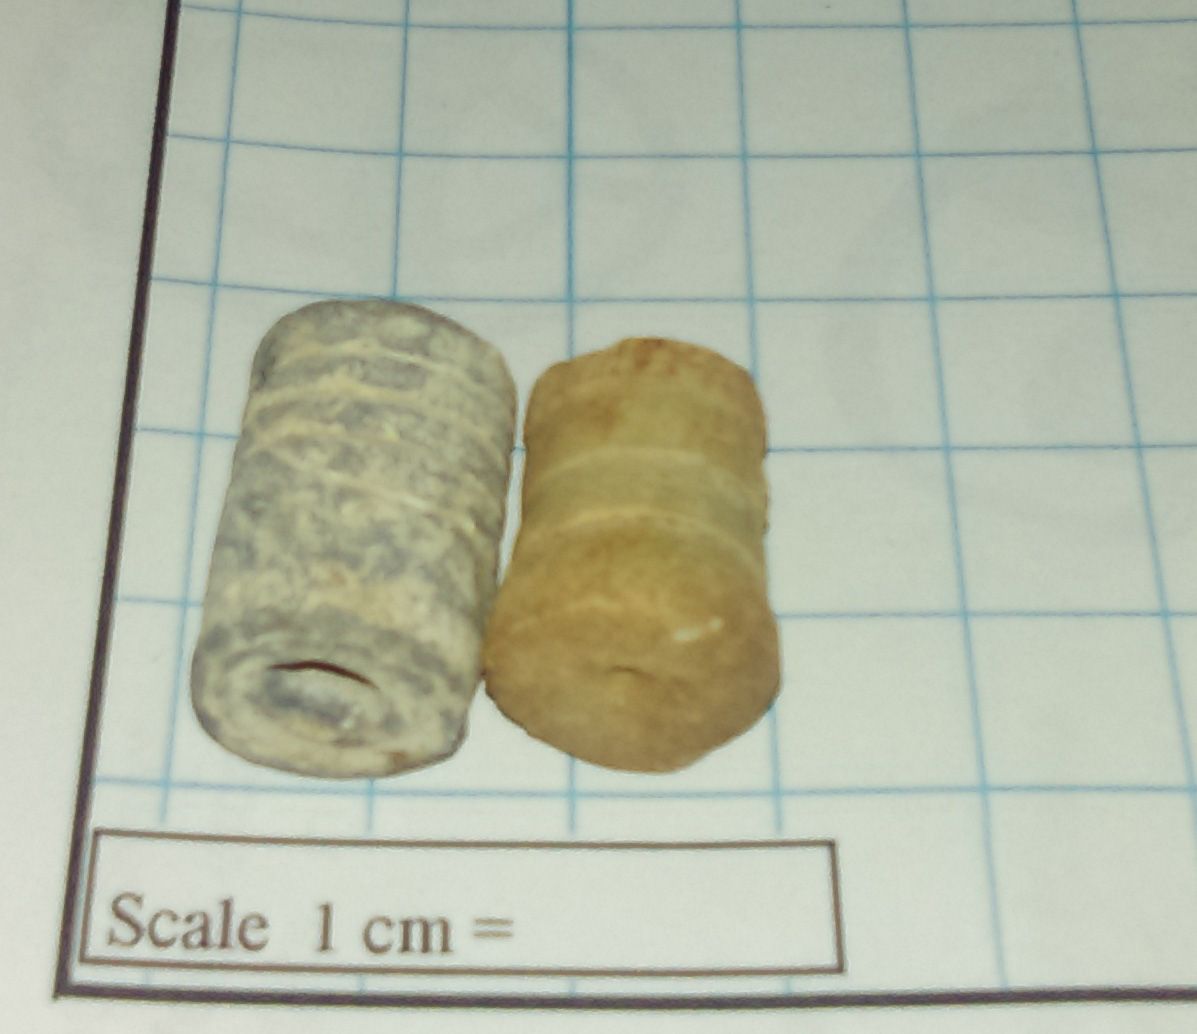 IMAG0397

On left a pulled bullet, battle of Decatur ALA.
On right an unidentified bullet with an entirely flat nose. Fired.